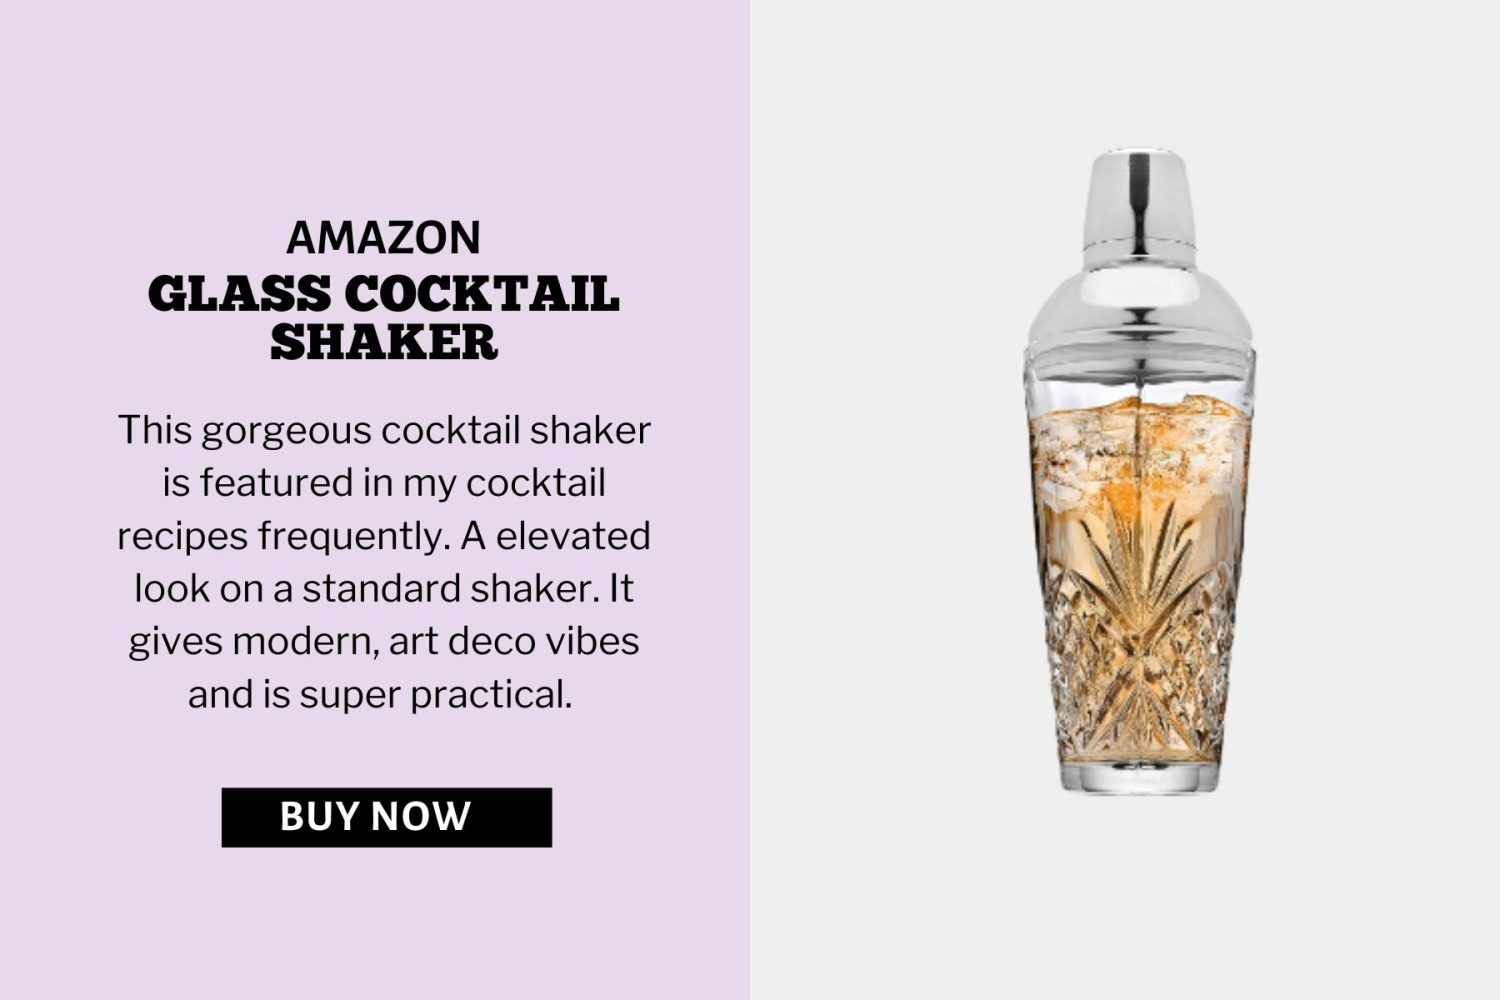 Cocktail Shaker product image.